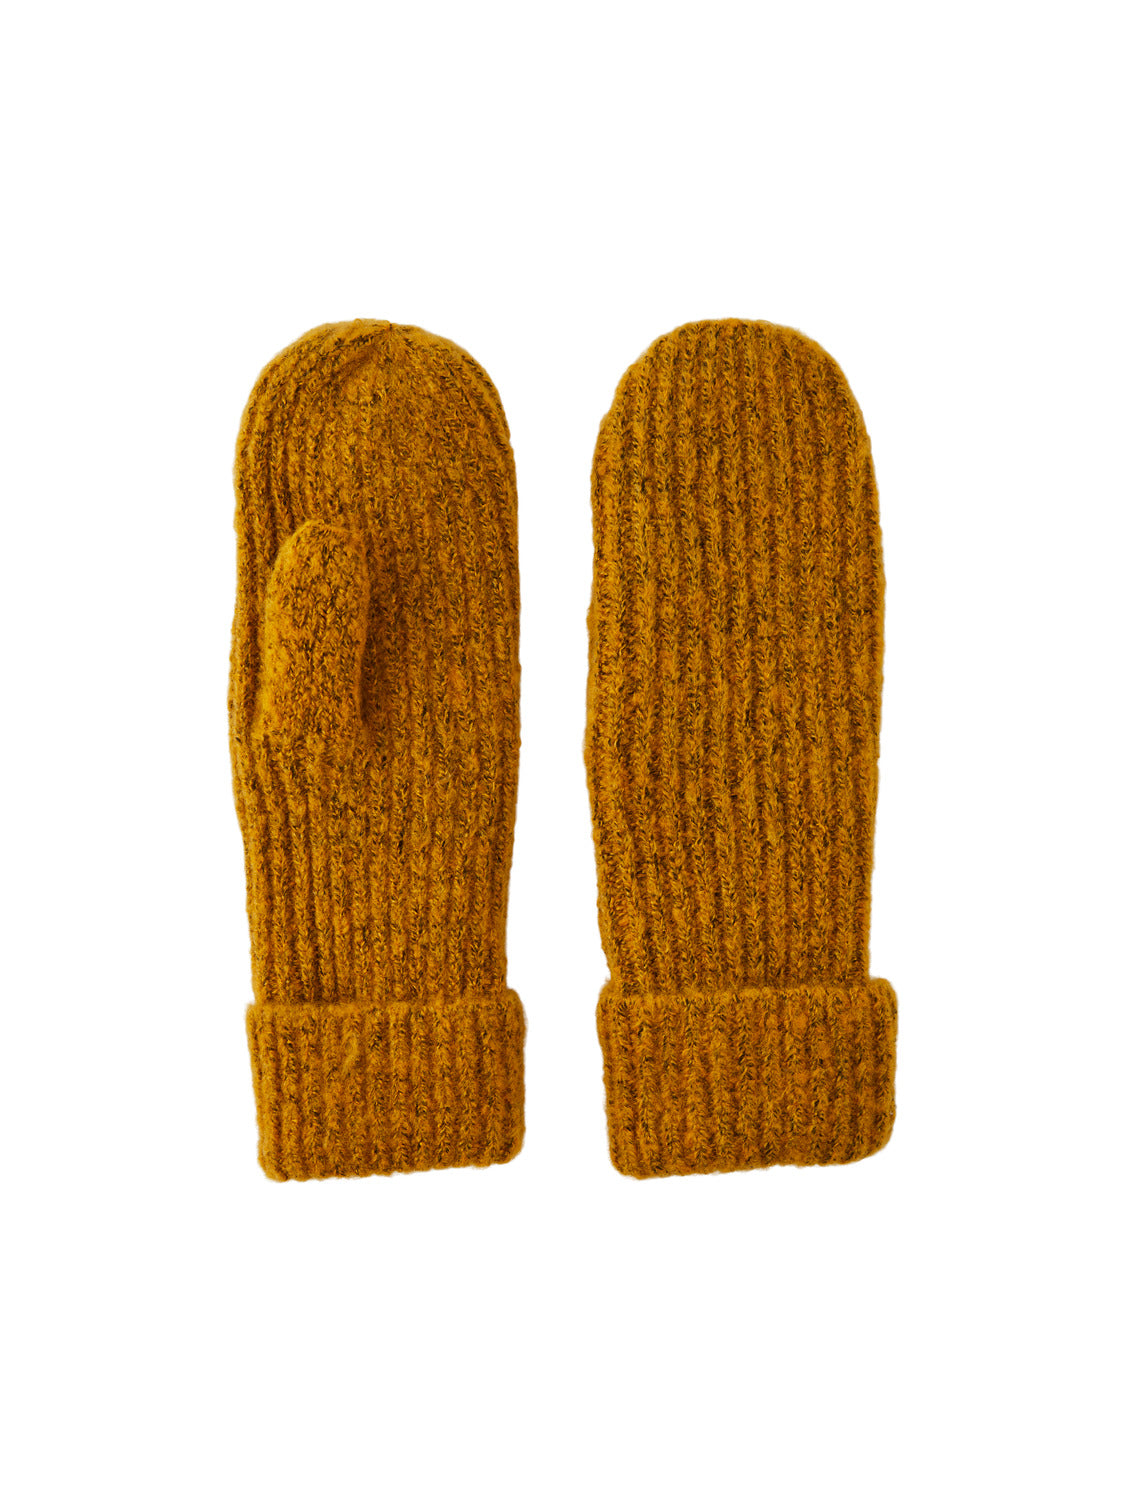 PCPYRON Mittens - Old Gold